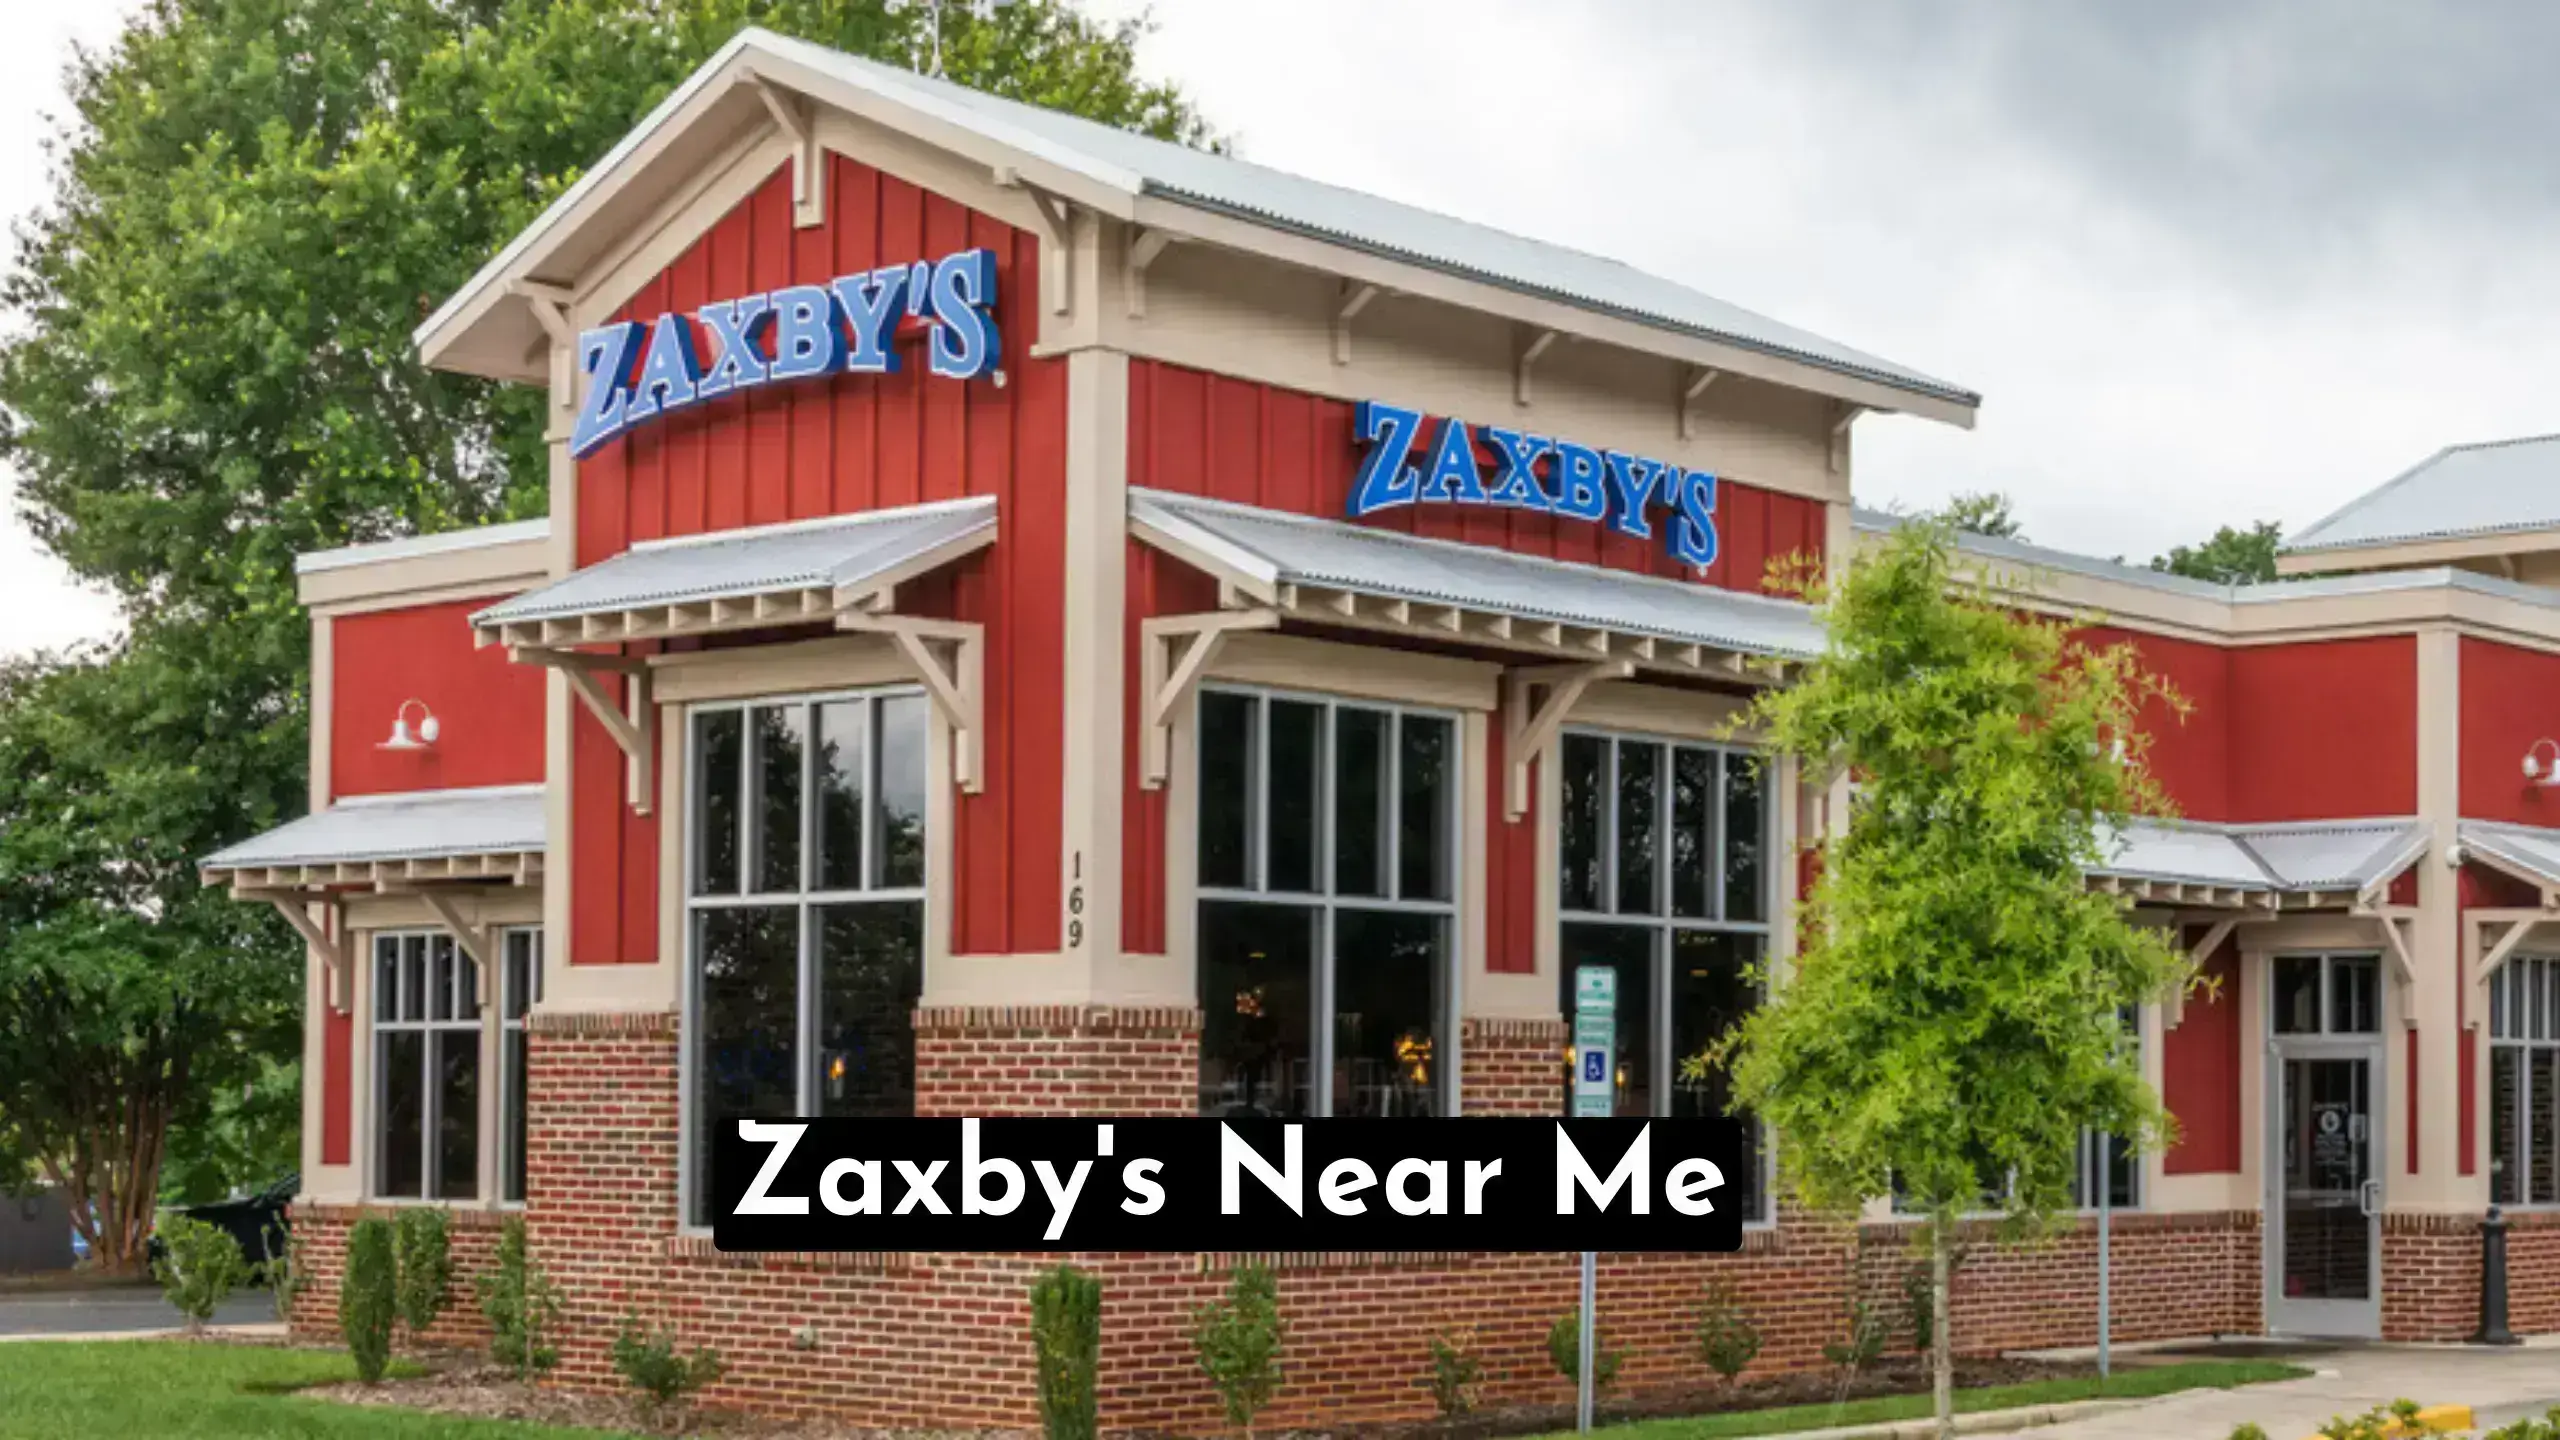 Zaxby’s Near Me: Find Flavorful Chicken Near You